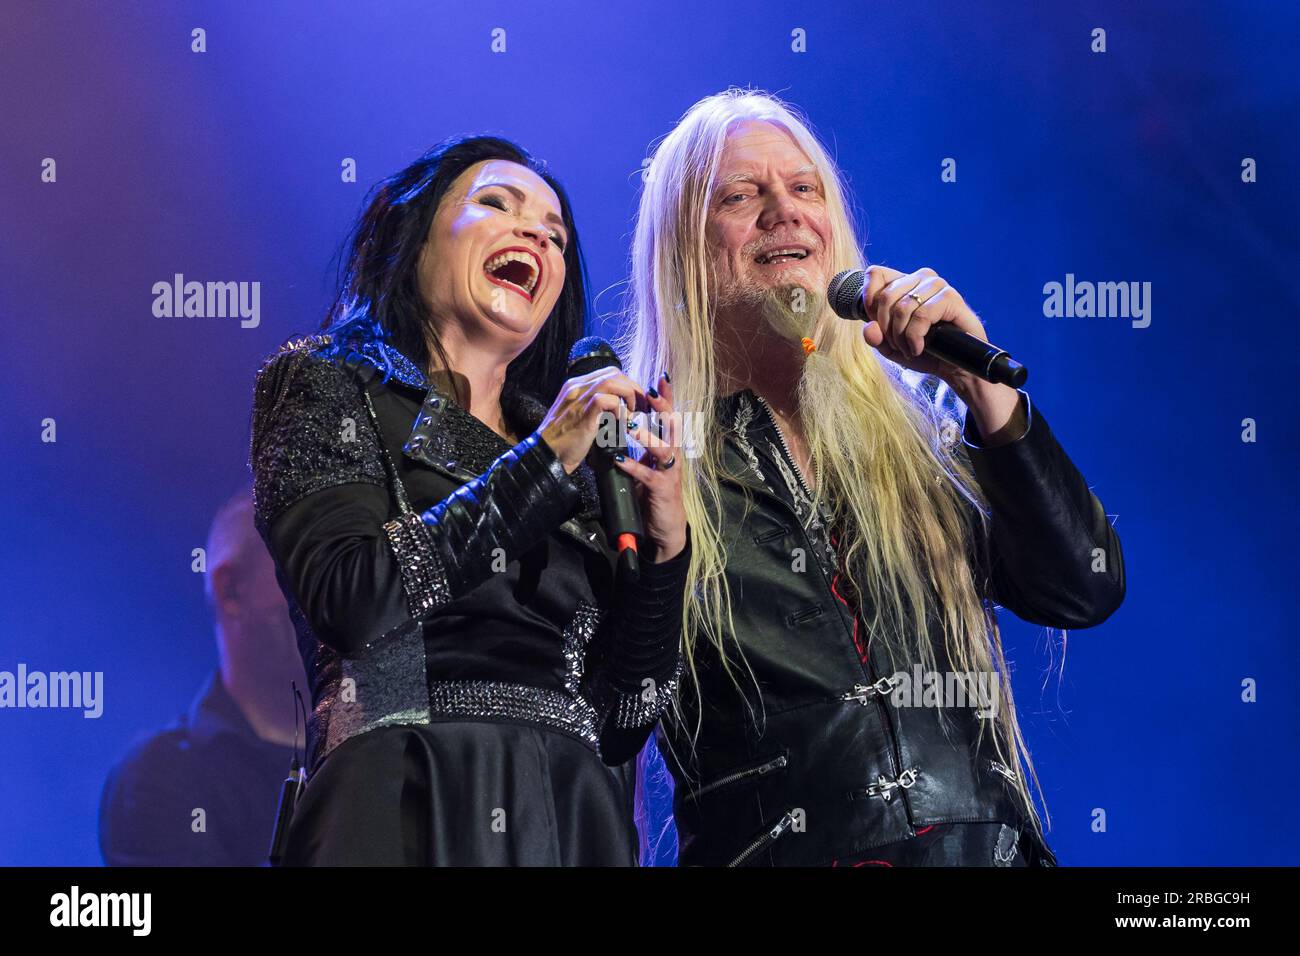 08.07.2023, Pratteln, Z7, Summer Nights, Tarja - Marko Hietala, Tarja Turunen and Marko Hietala, Both Ex Nightwish members together again on stage for the first time sincs 2005. Stock Photo